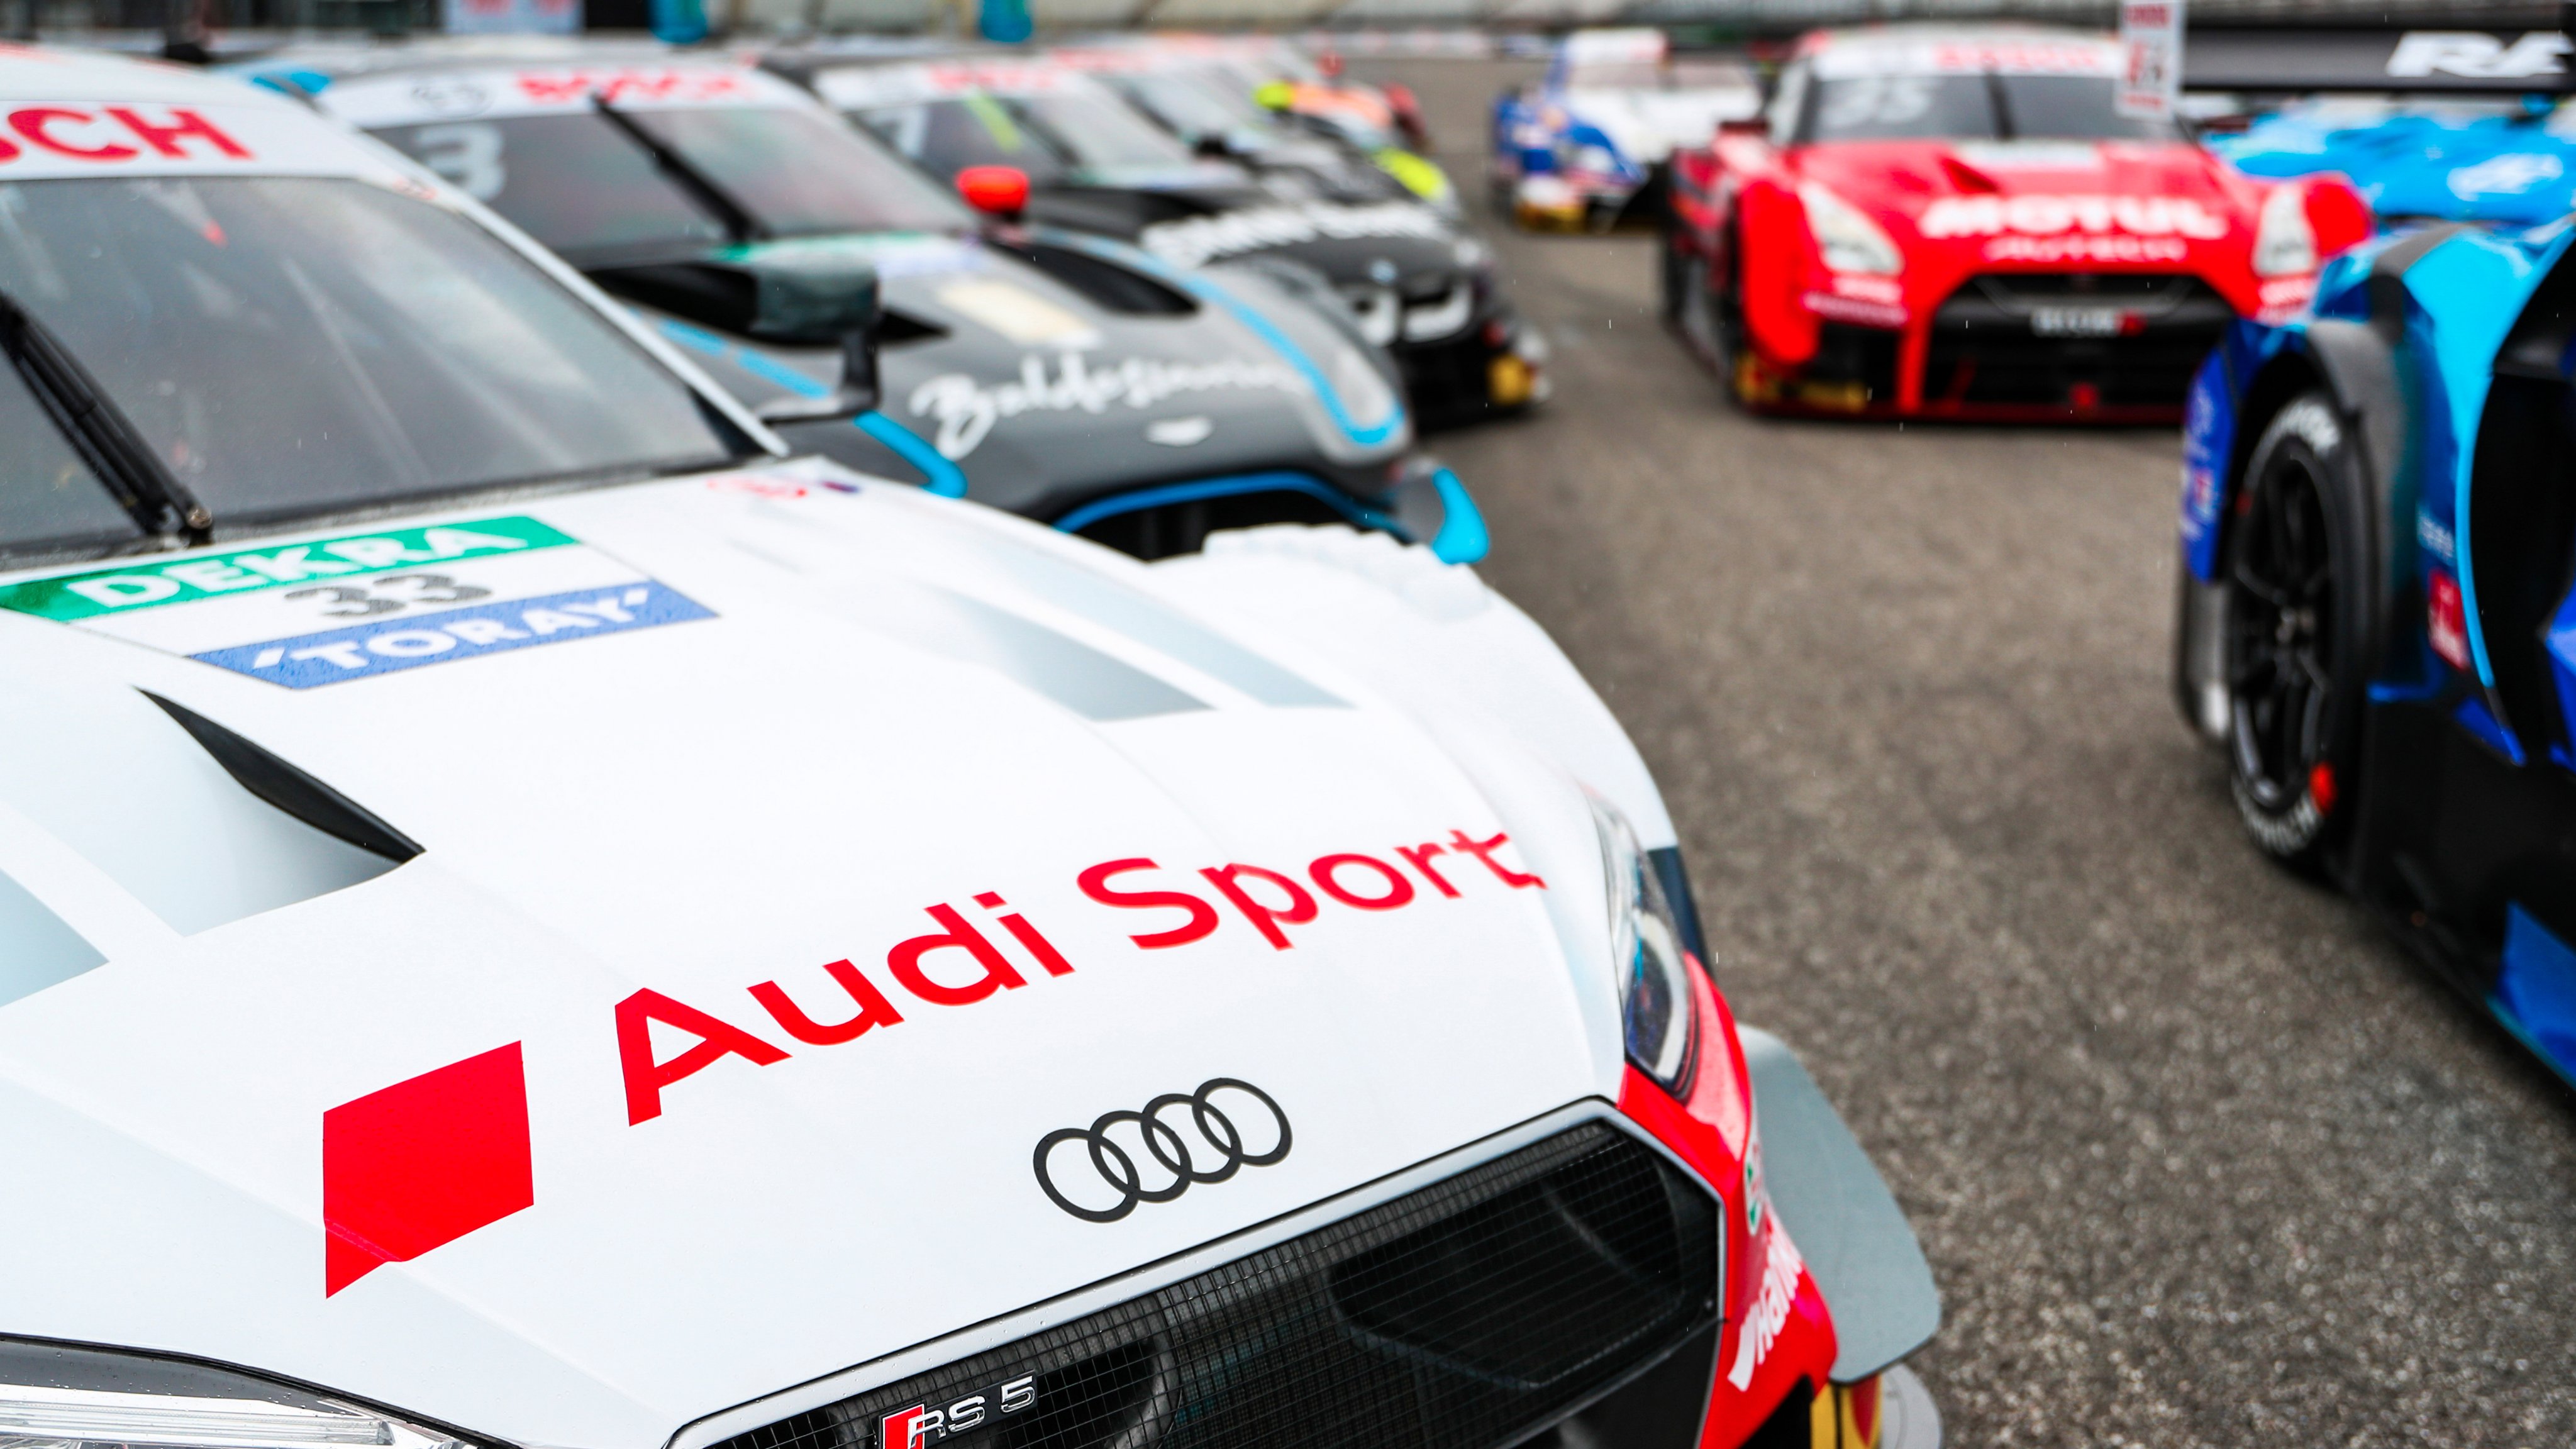 Audi Sport on X: 22 cars on the grid for the @SUPERGT_JP x @DTM Dream  Race. We can't wait to go racing in Japan next week! >>   #OwnEverySecond #DTM #SuperGTxDTM #ranDTM